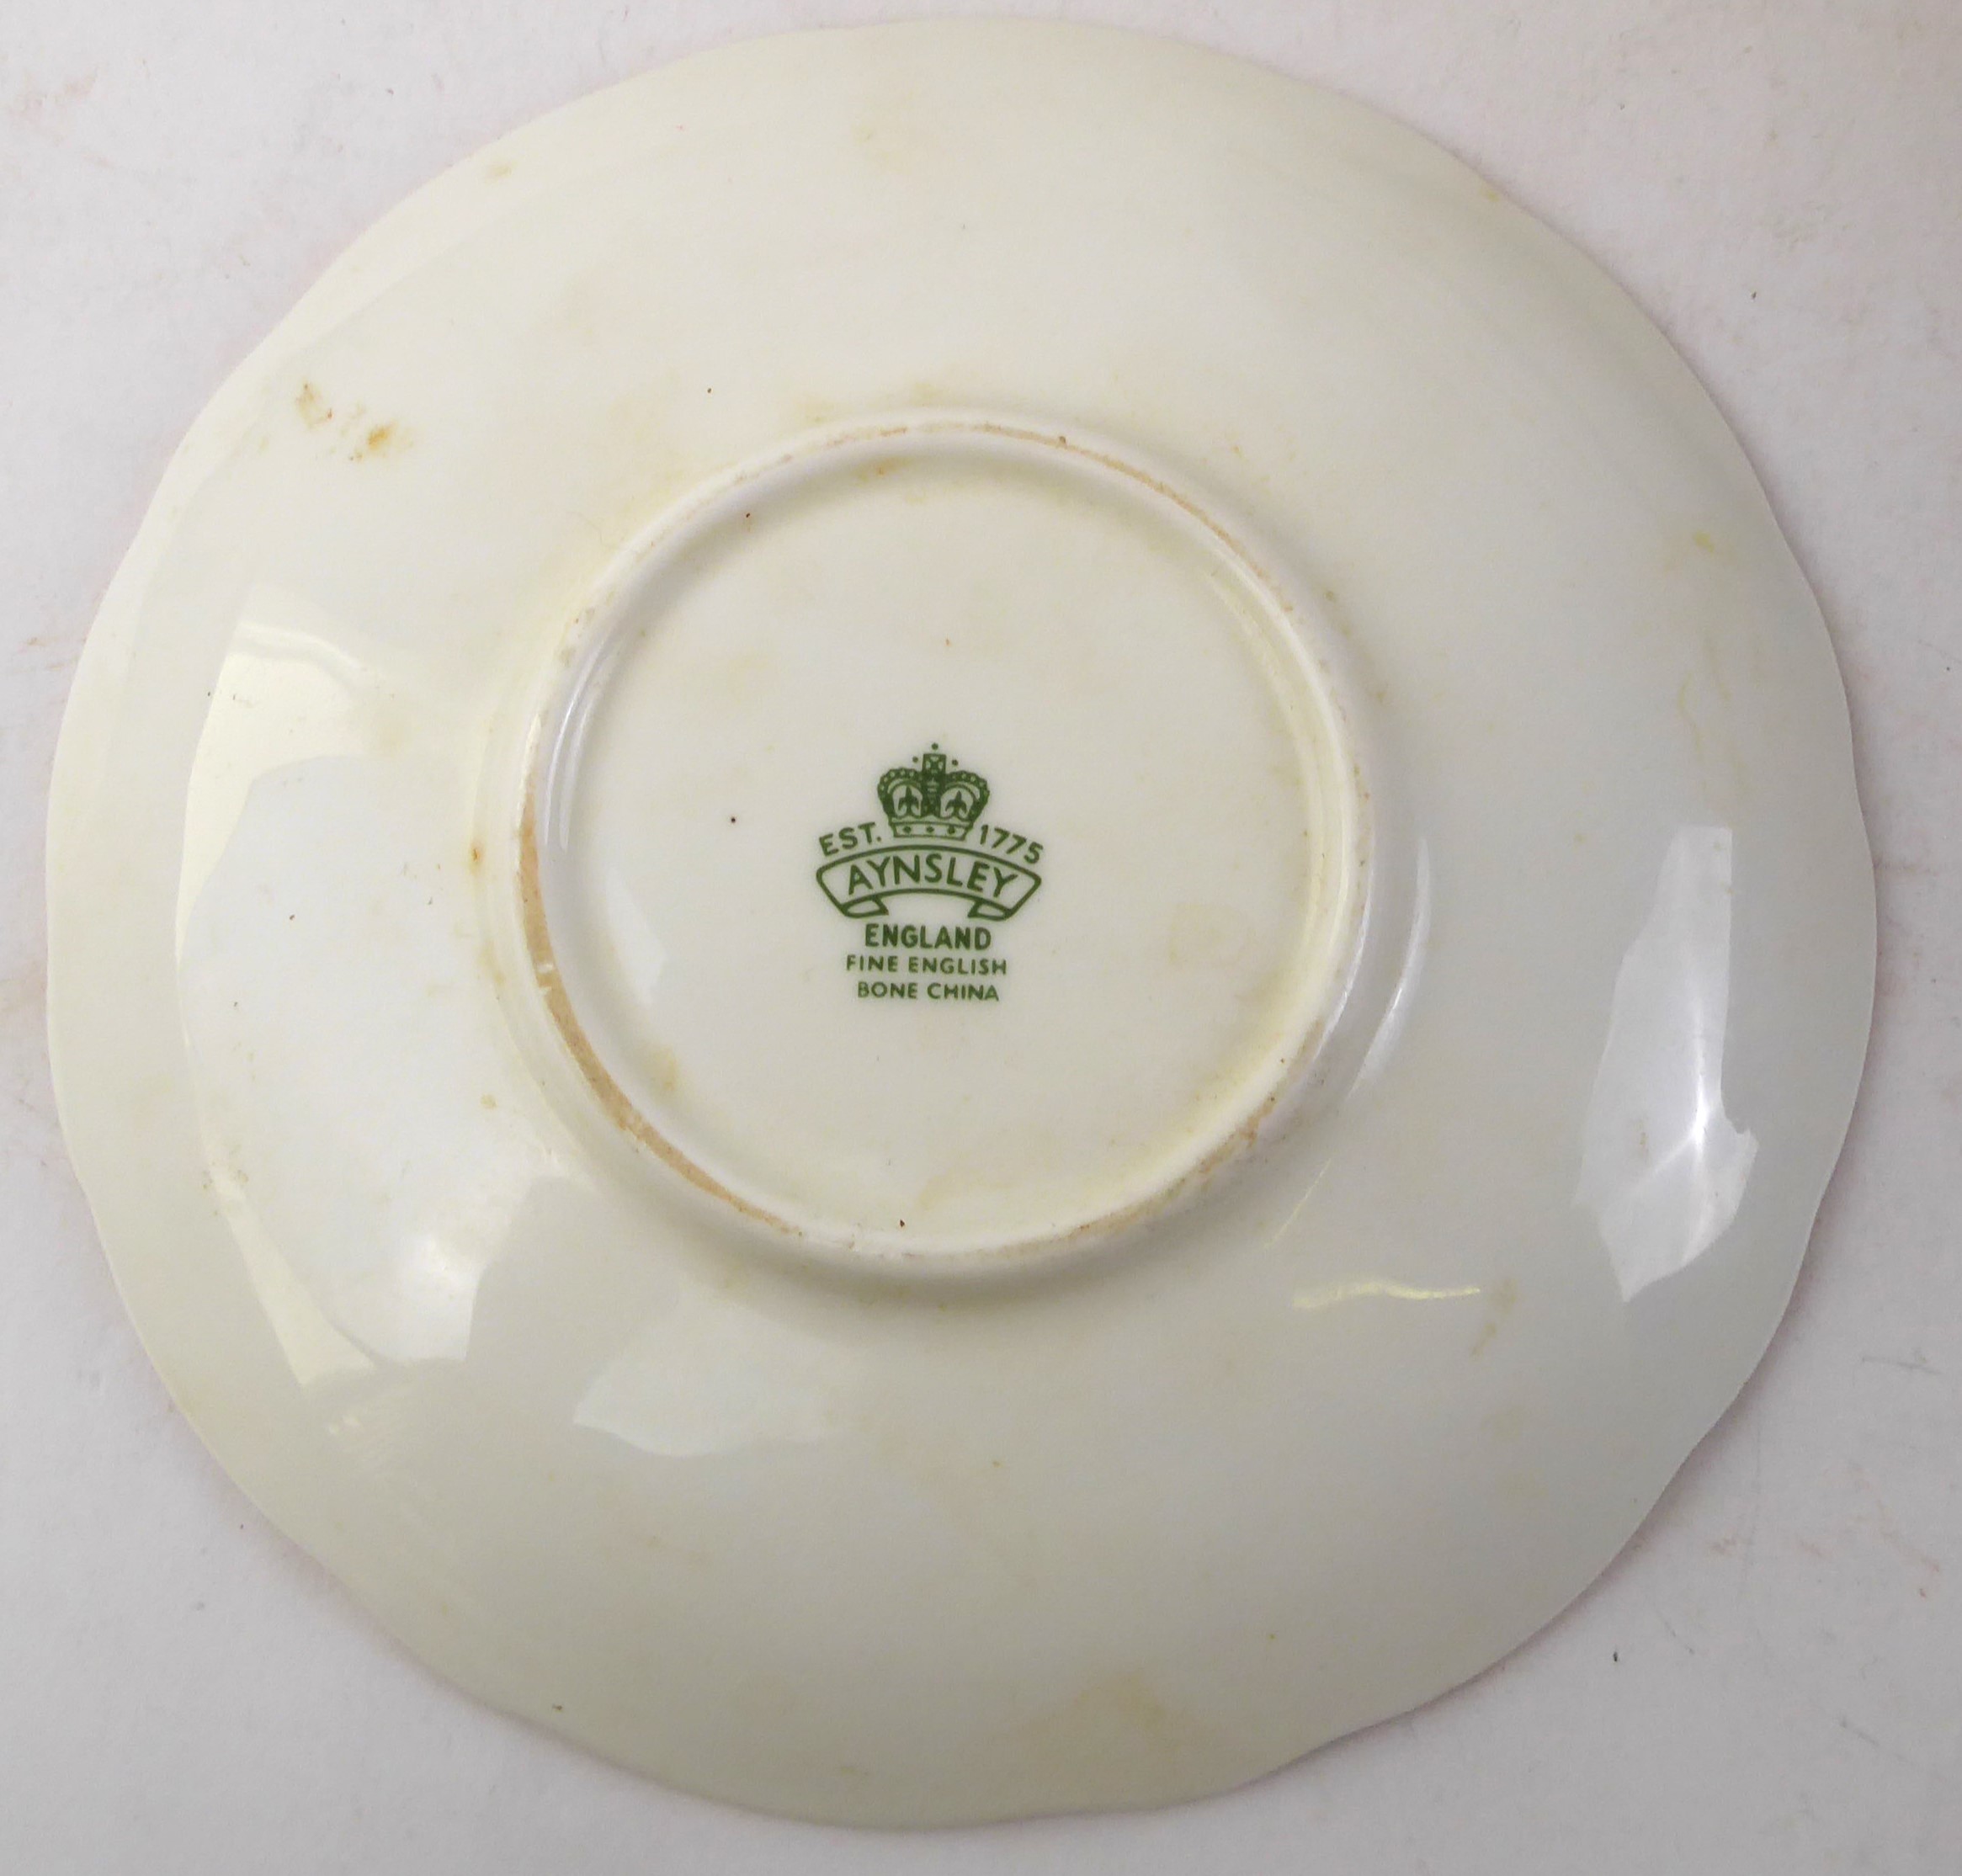 An Aynsley bone china part-tea service decorated with pink roses - green printed factory marks, - Image 3 of 3